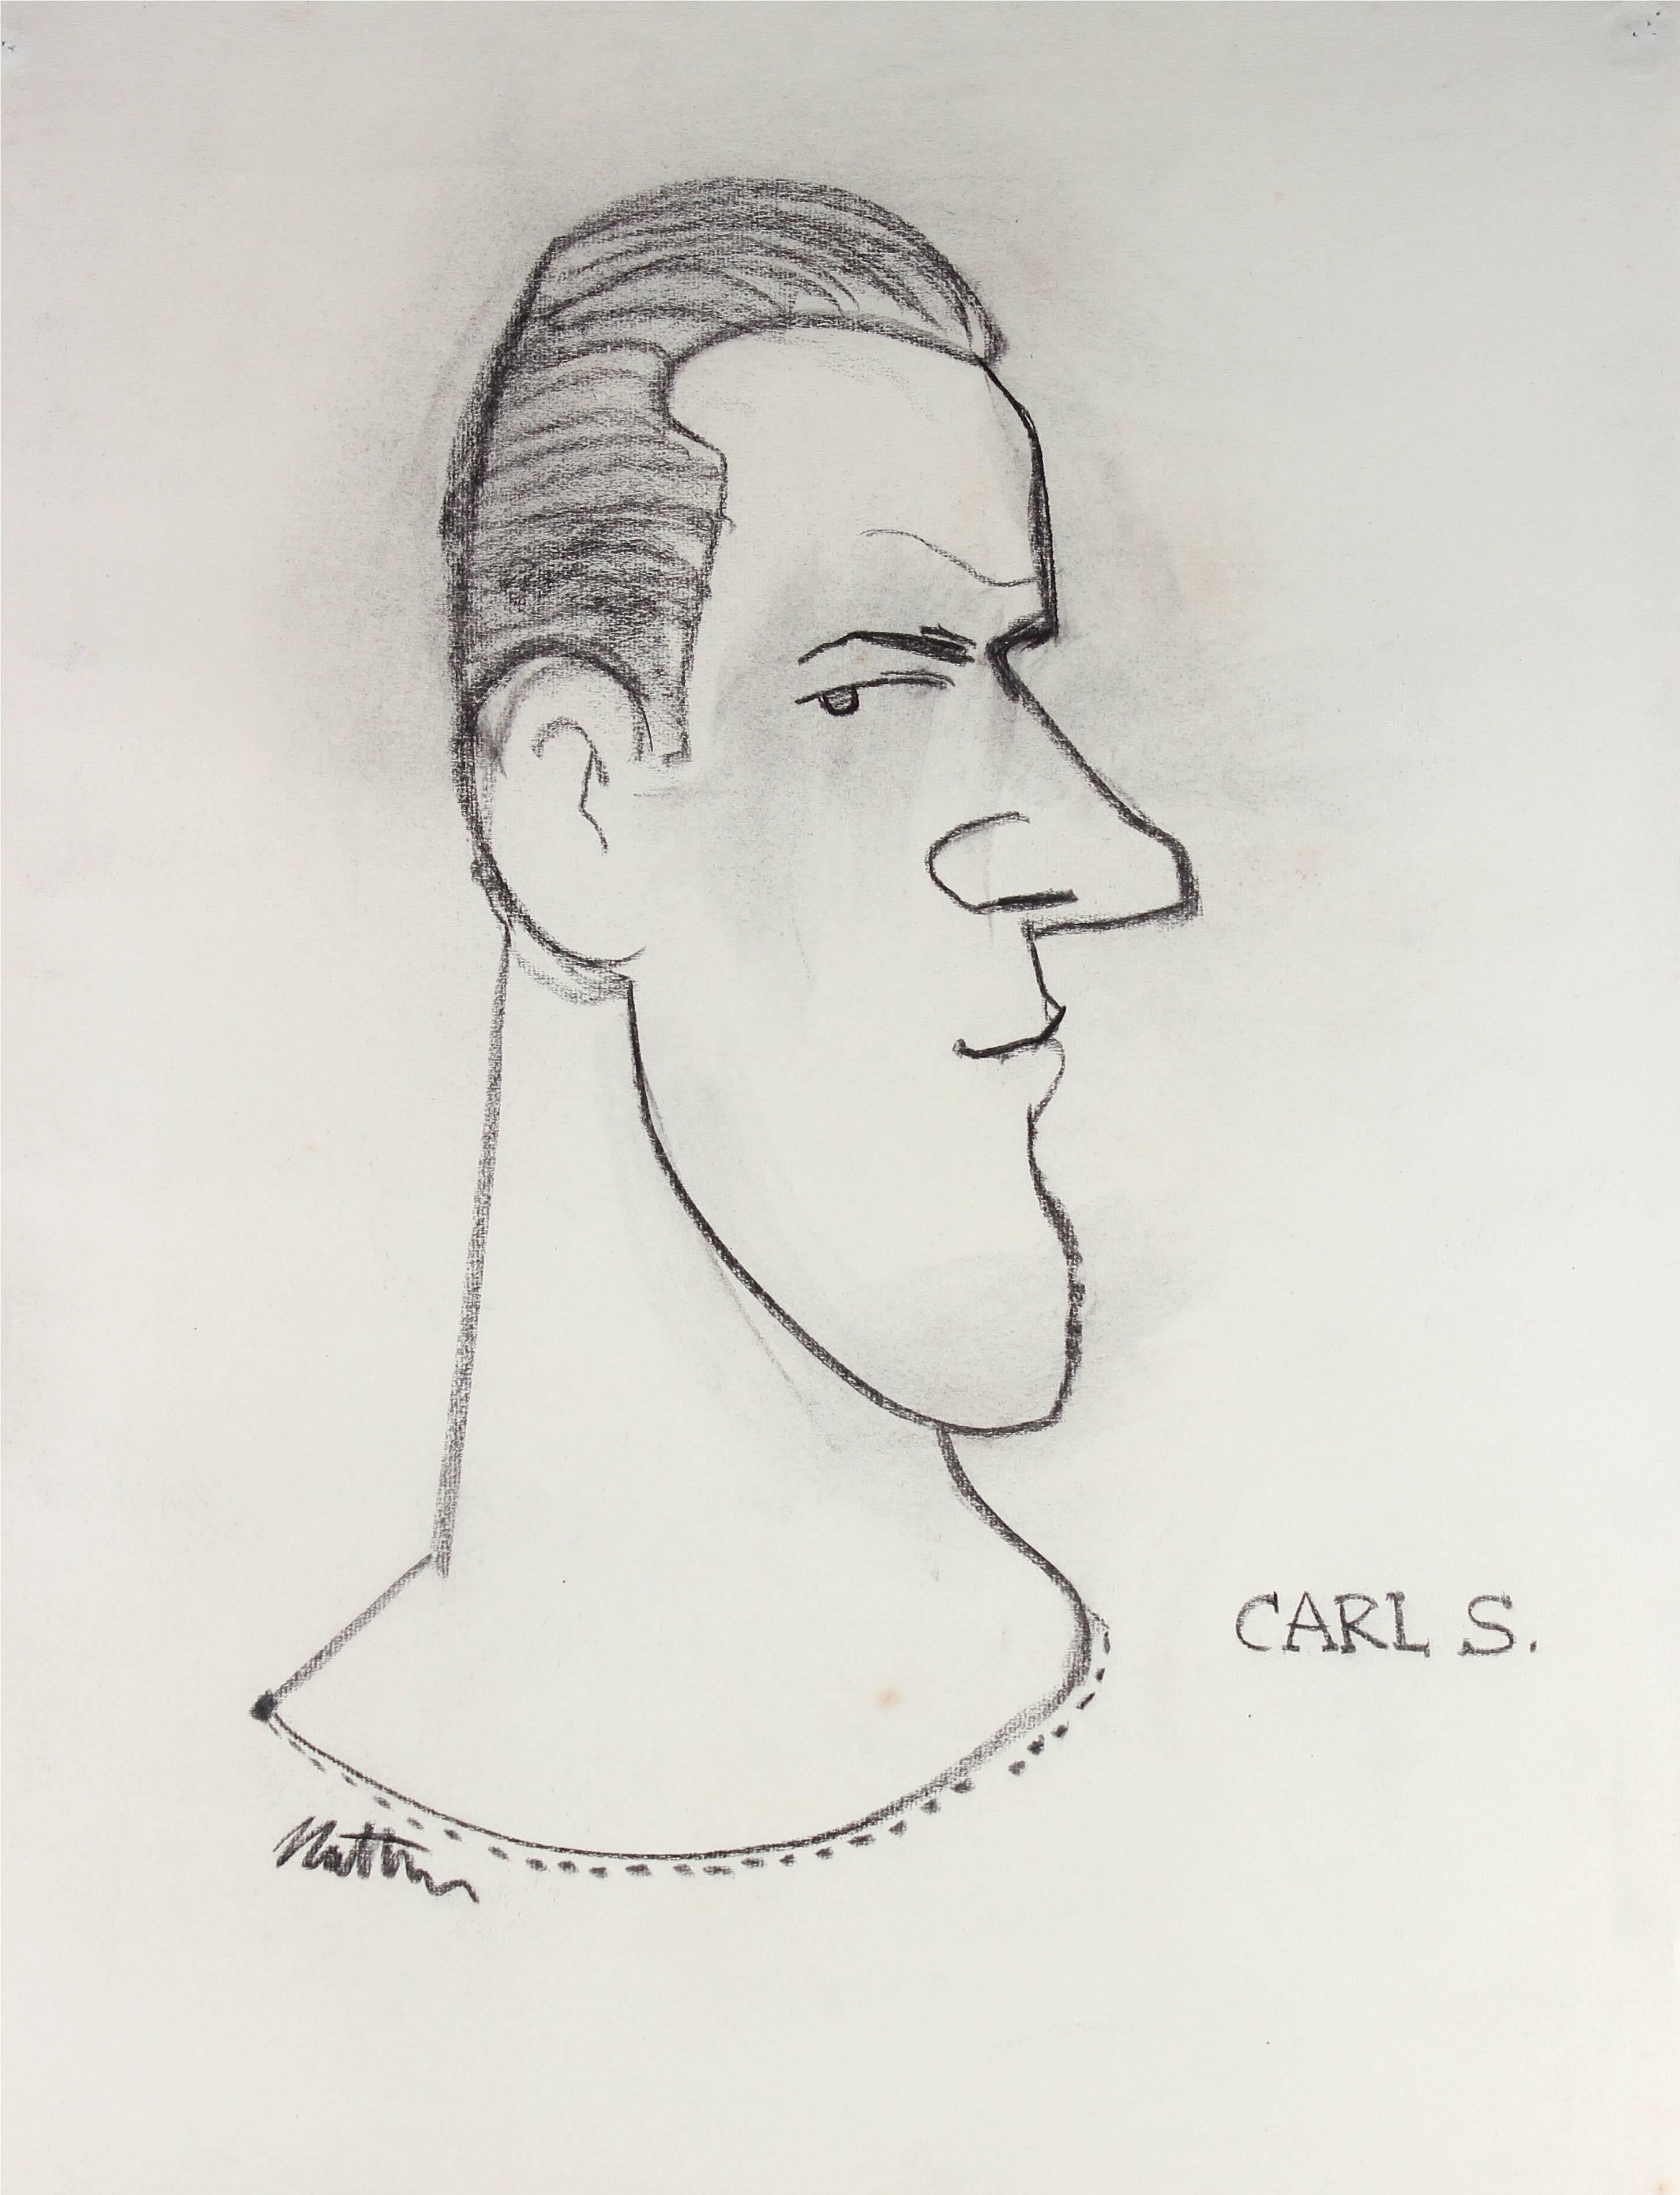 Academic Monochromatic Illustration of a Man's Profile in Charcoal, Circa 1945